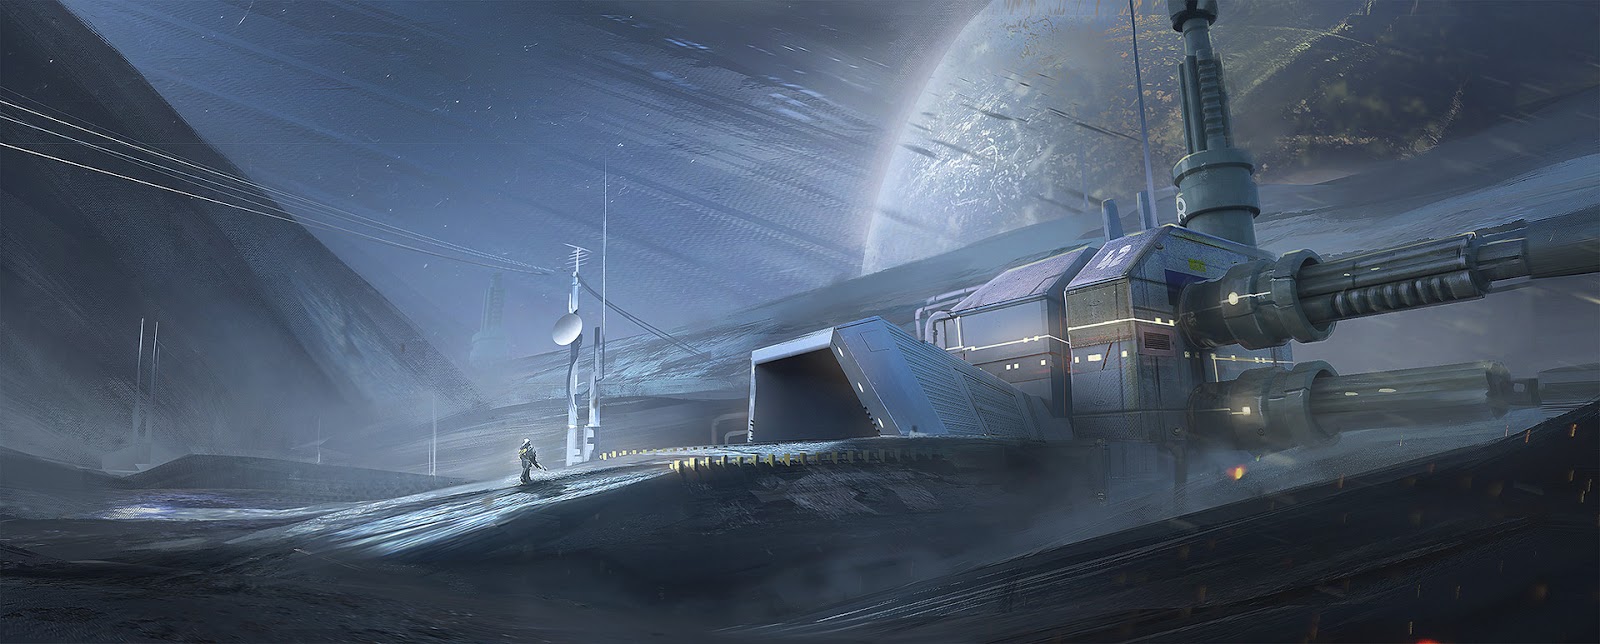 Images: A Collection Of Sci-Fi Concept Art From Oleksiy Rusyuk